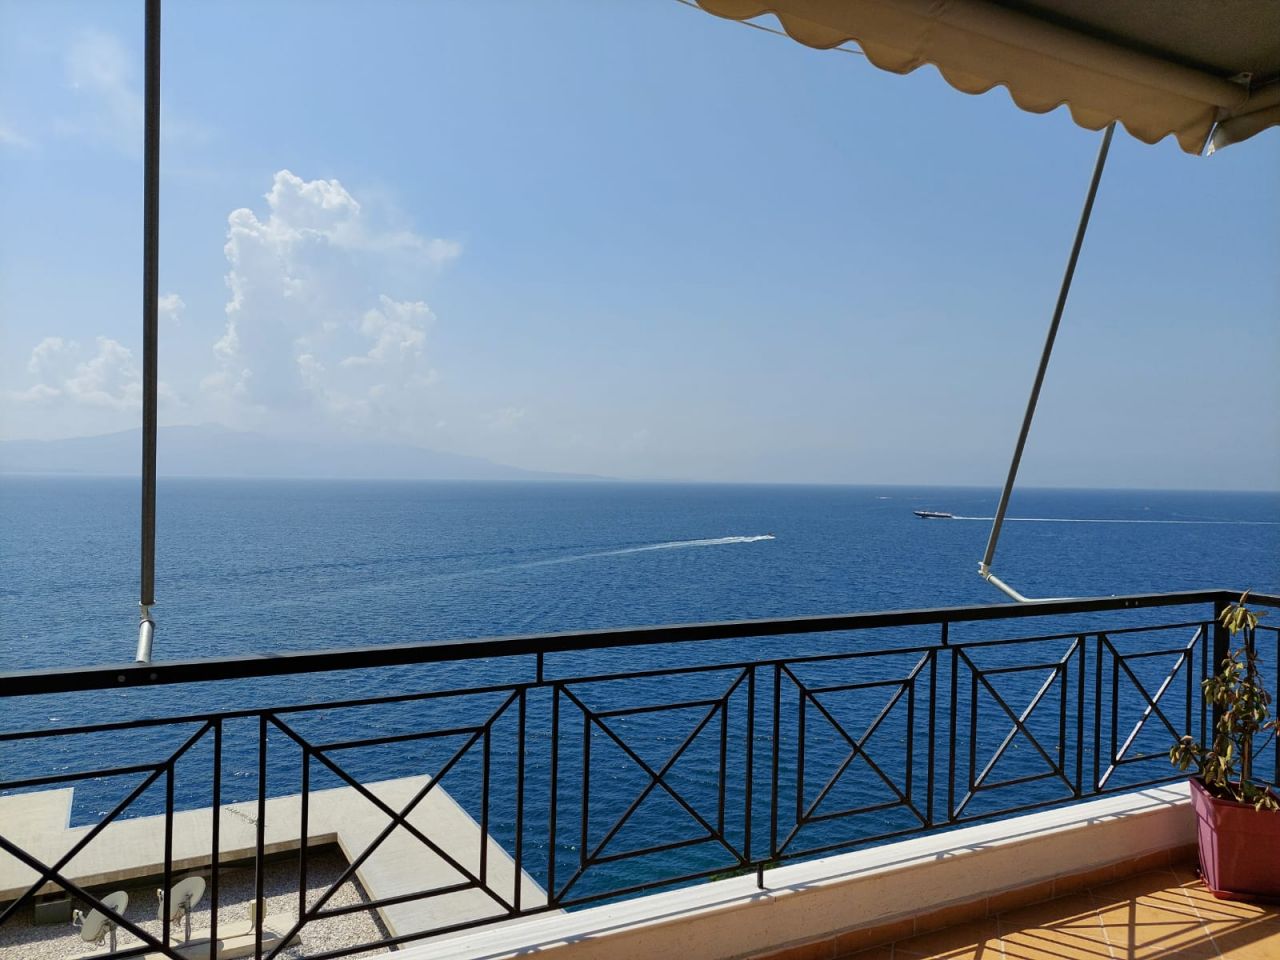 LUXURIOUS APARTMENTS IN SARANDA FOR SALE.